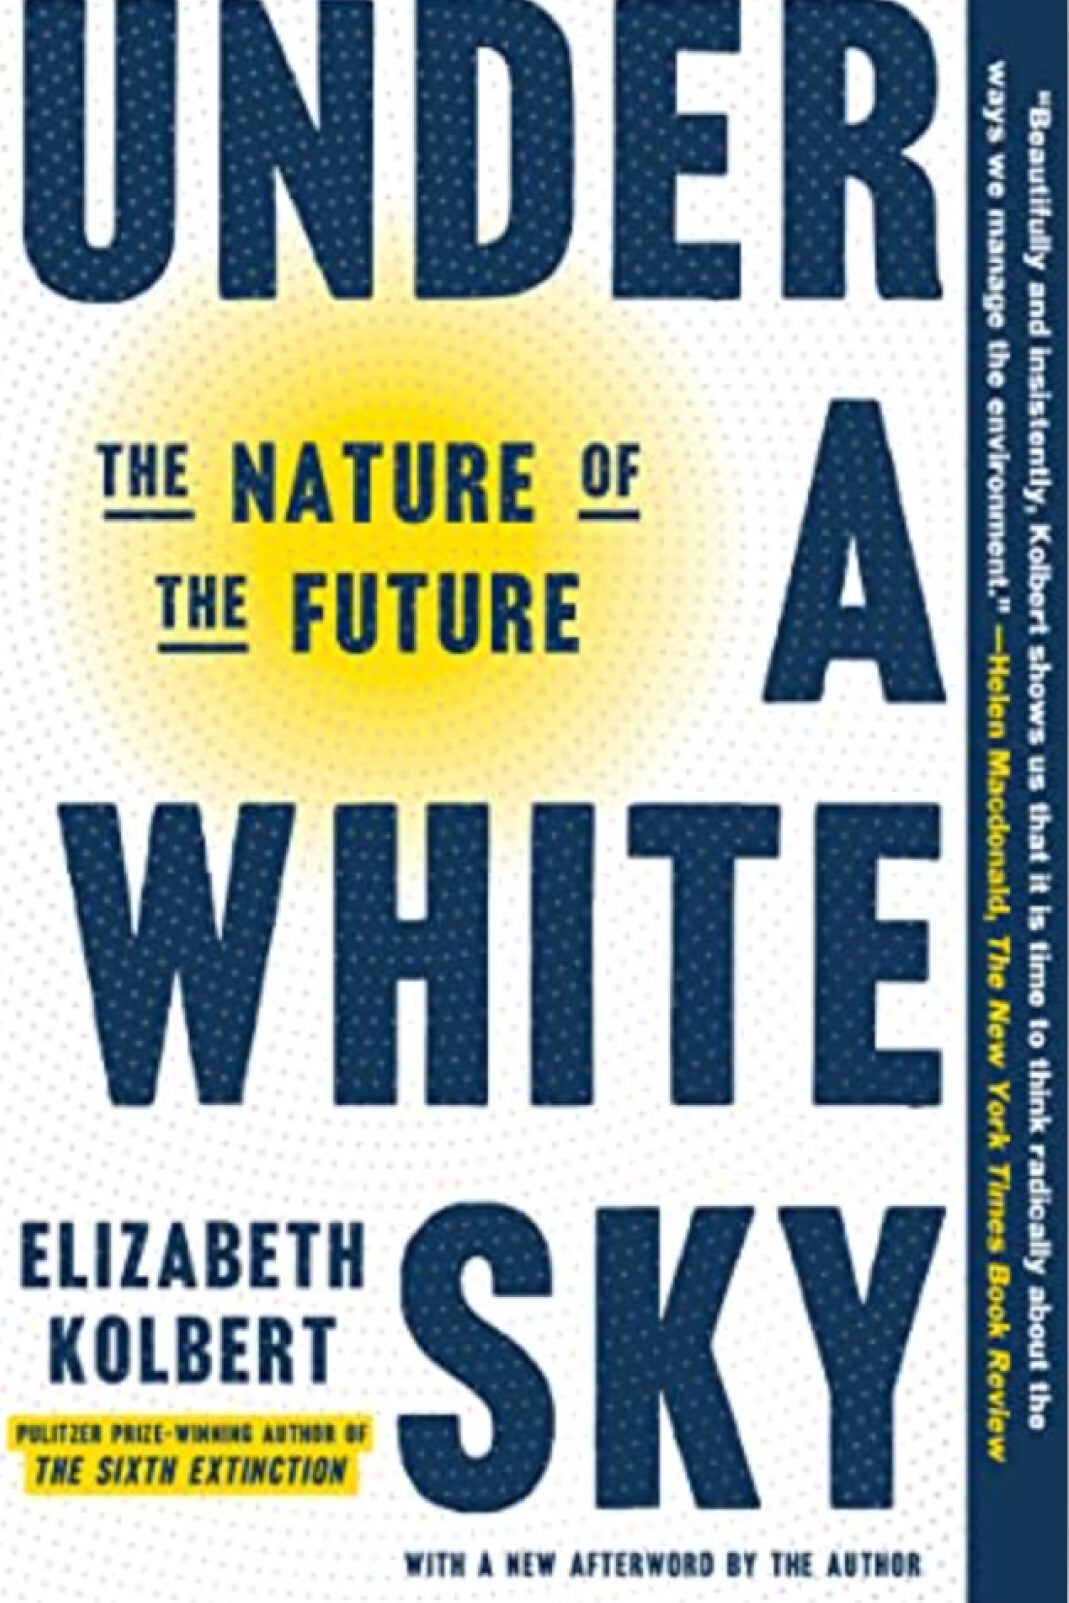 Book cover: “Under A White Sky: The Nature of the Future” by Elizabeth Kolbert.